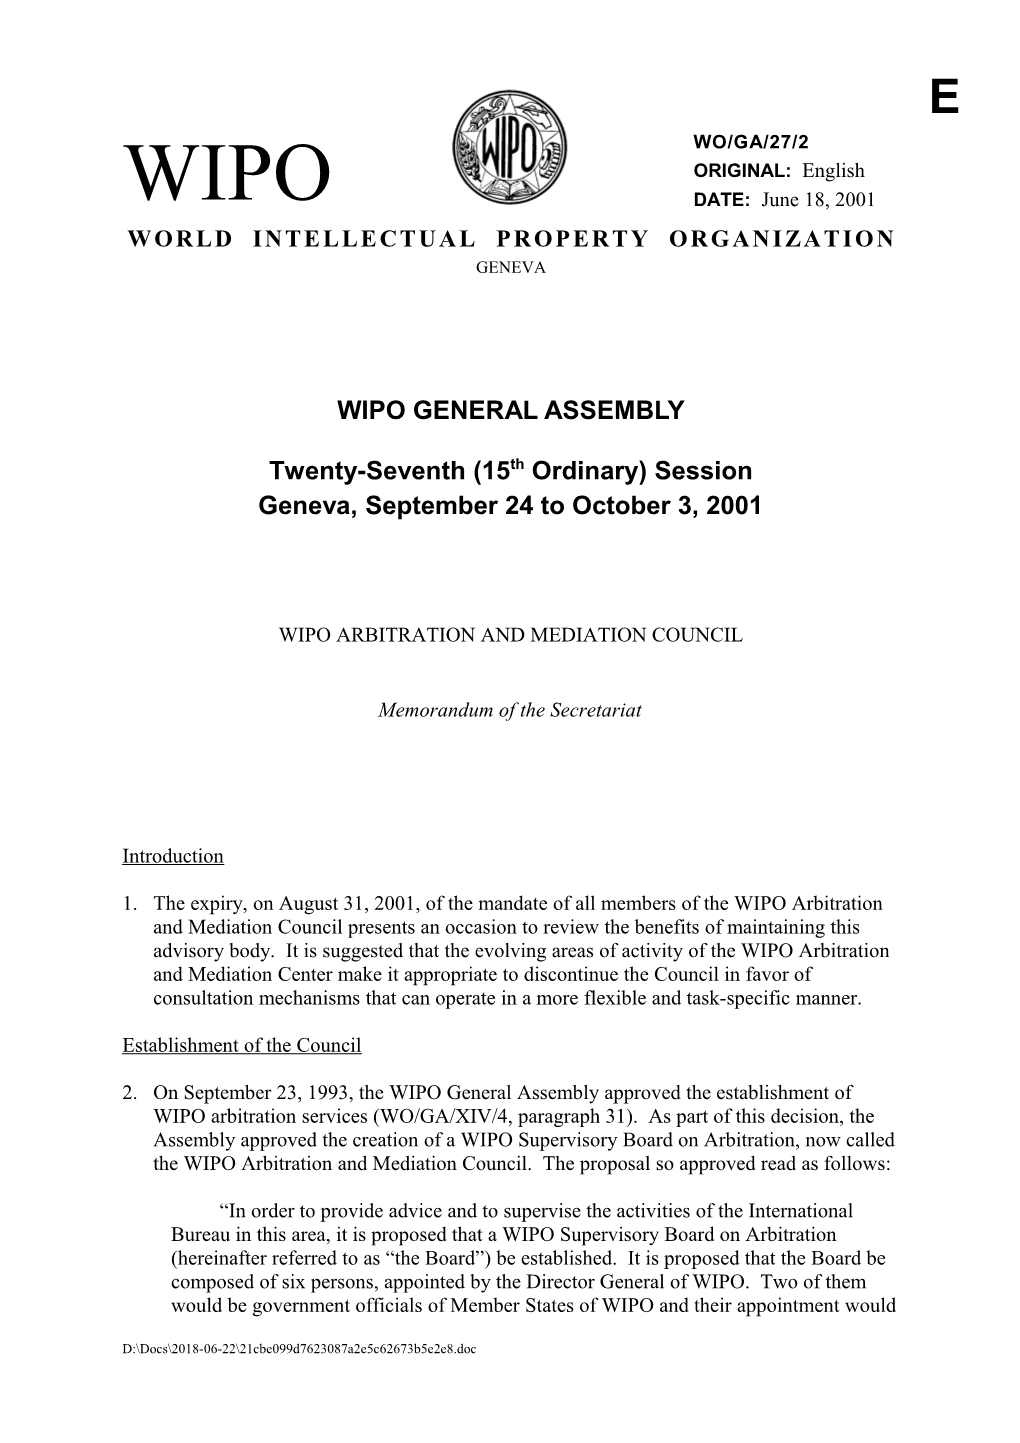 WO/GA/27/2: WIPO Arbitration and Mediation Council